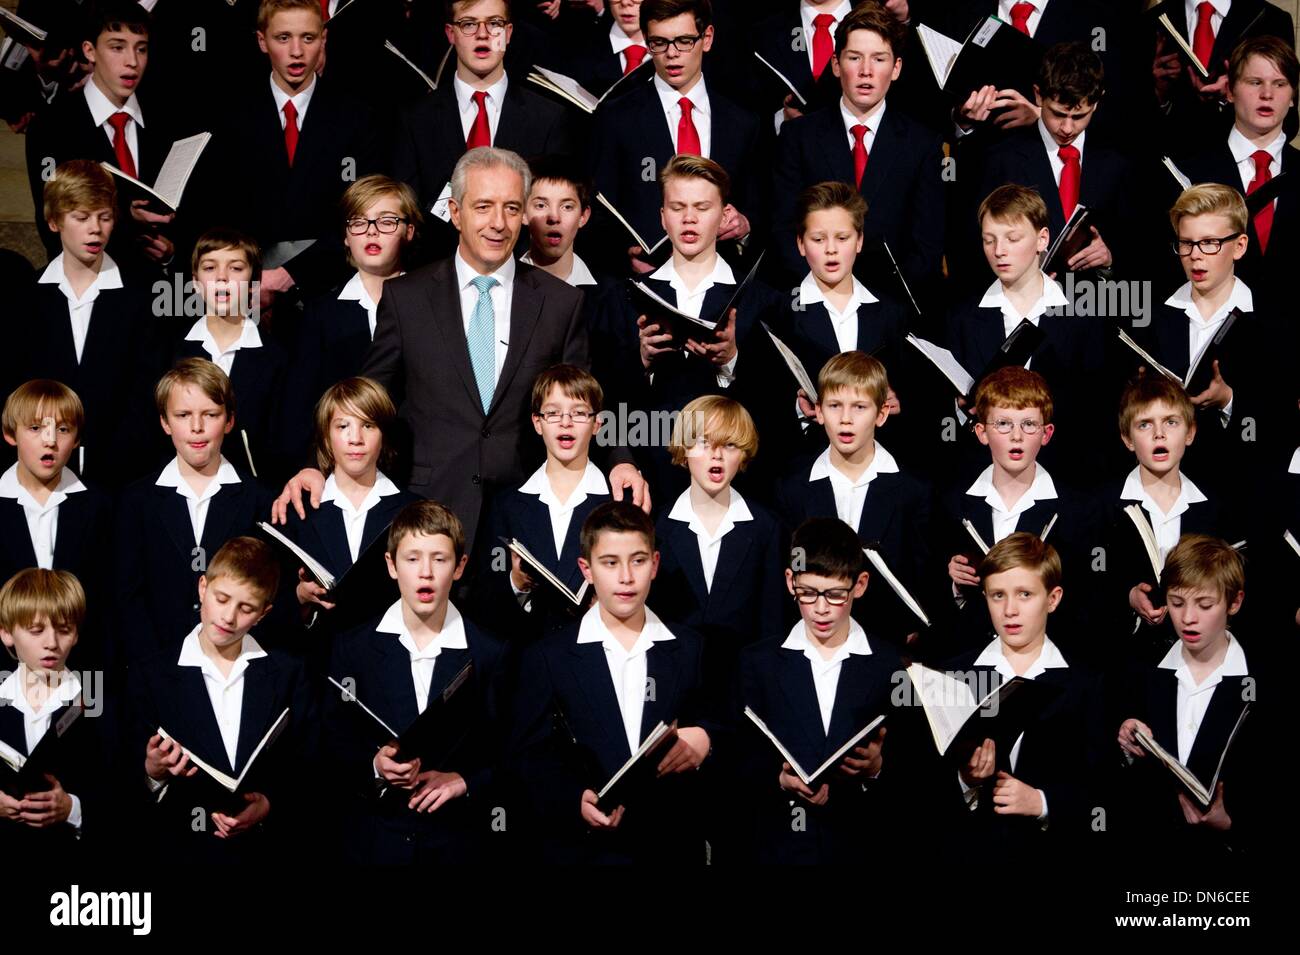 Dresden, Germany. 19th Dec, 2013. The Dresden choirboys surround Saxon's governor Stanislav Tillich during the singing in the Advent's season in the state chancellery in Dresden, Germany, 19 December 2013. Photo: Sebastian Kahnert/dpa/Alamy Live News Stock Photo